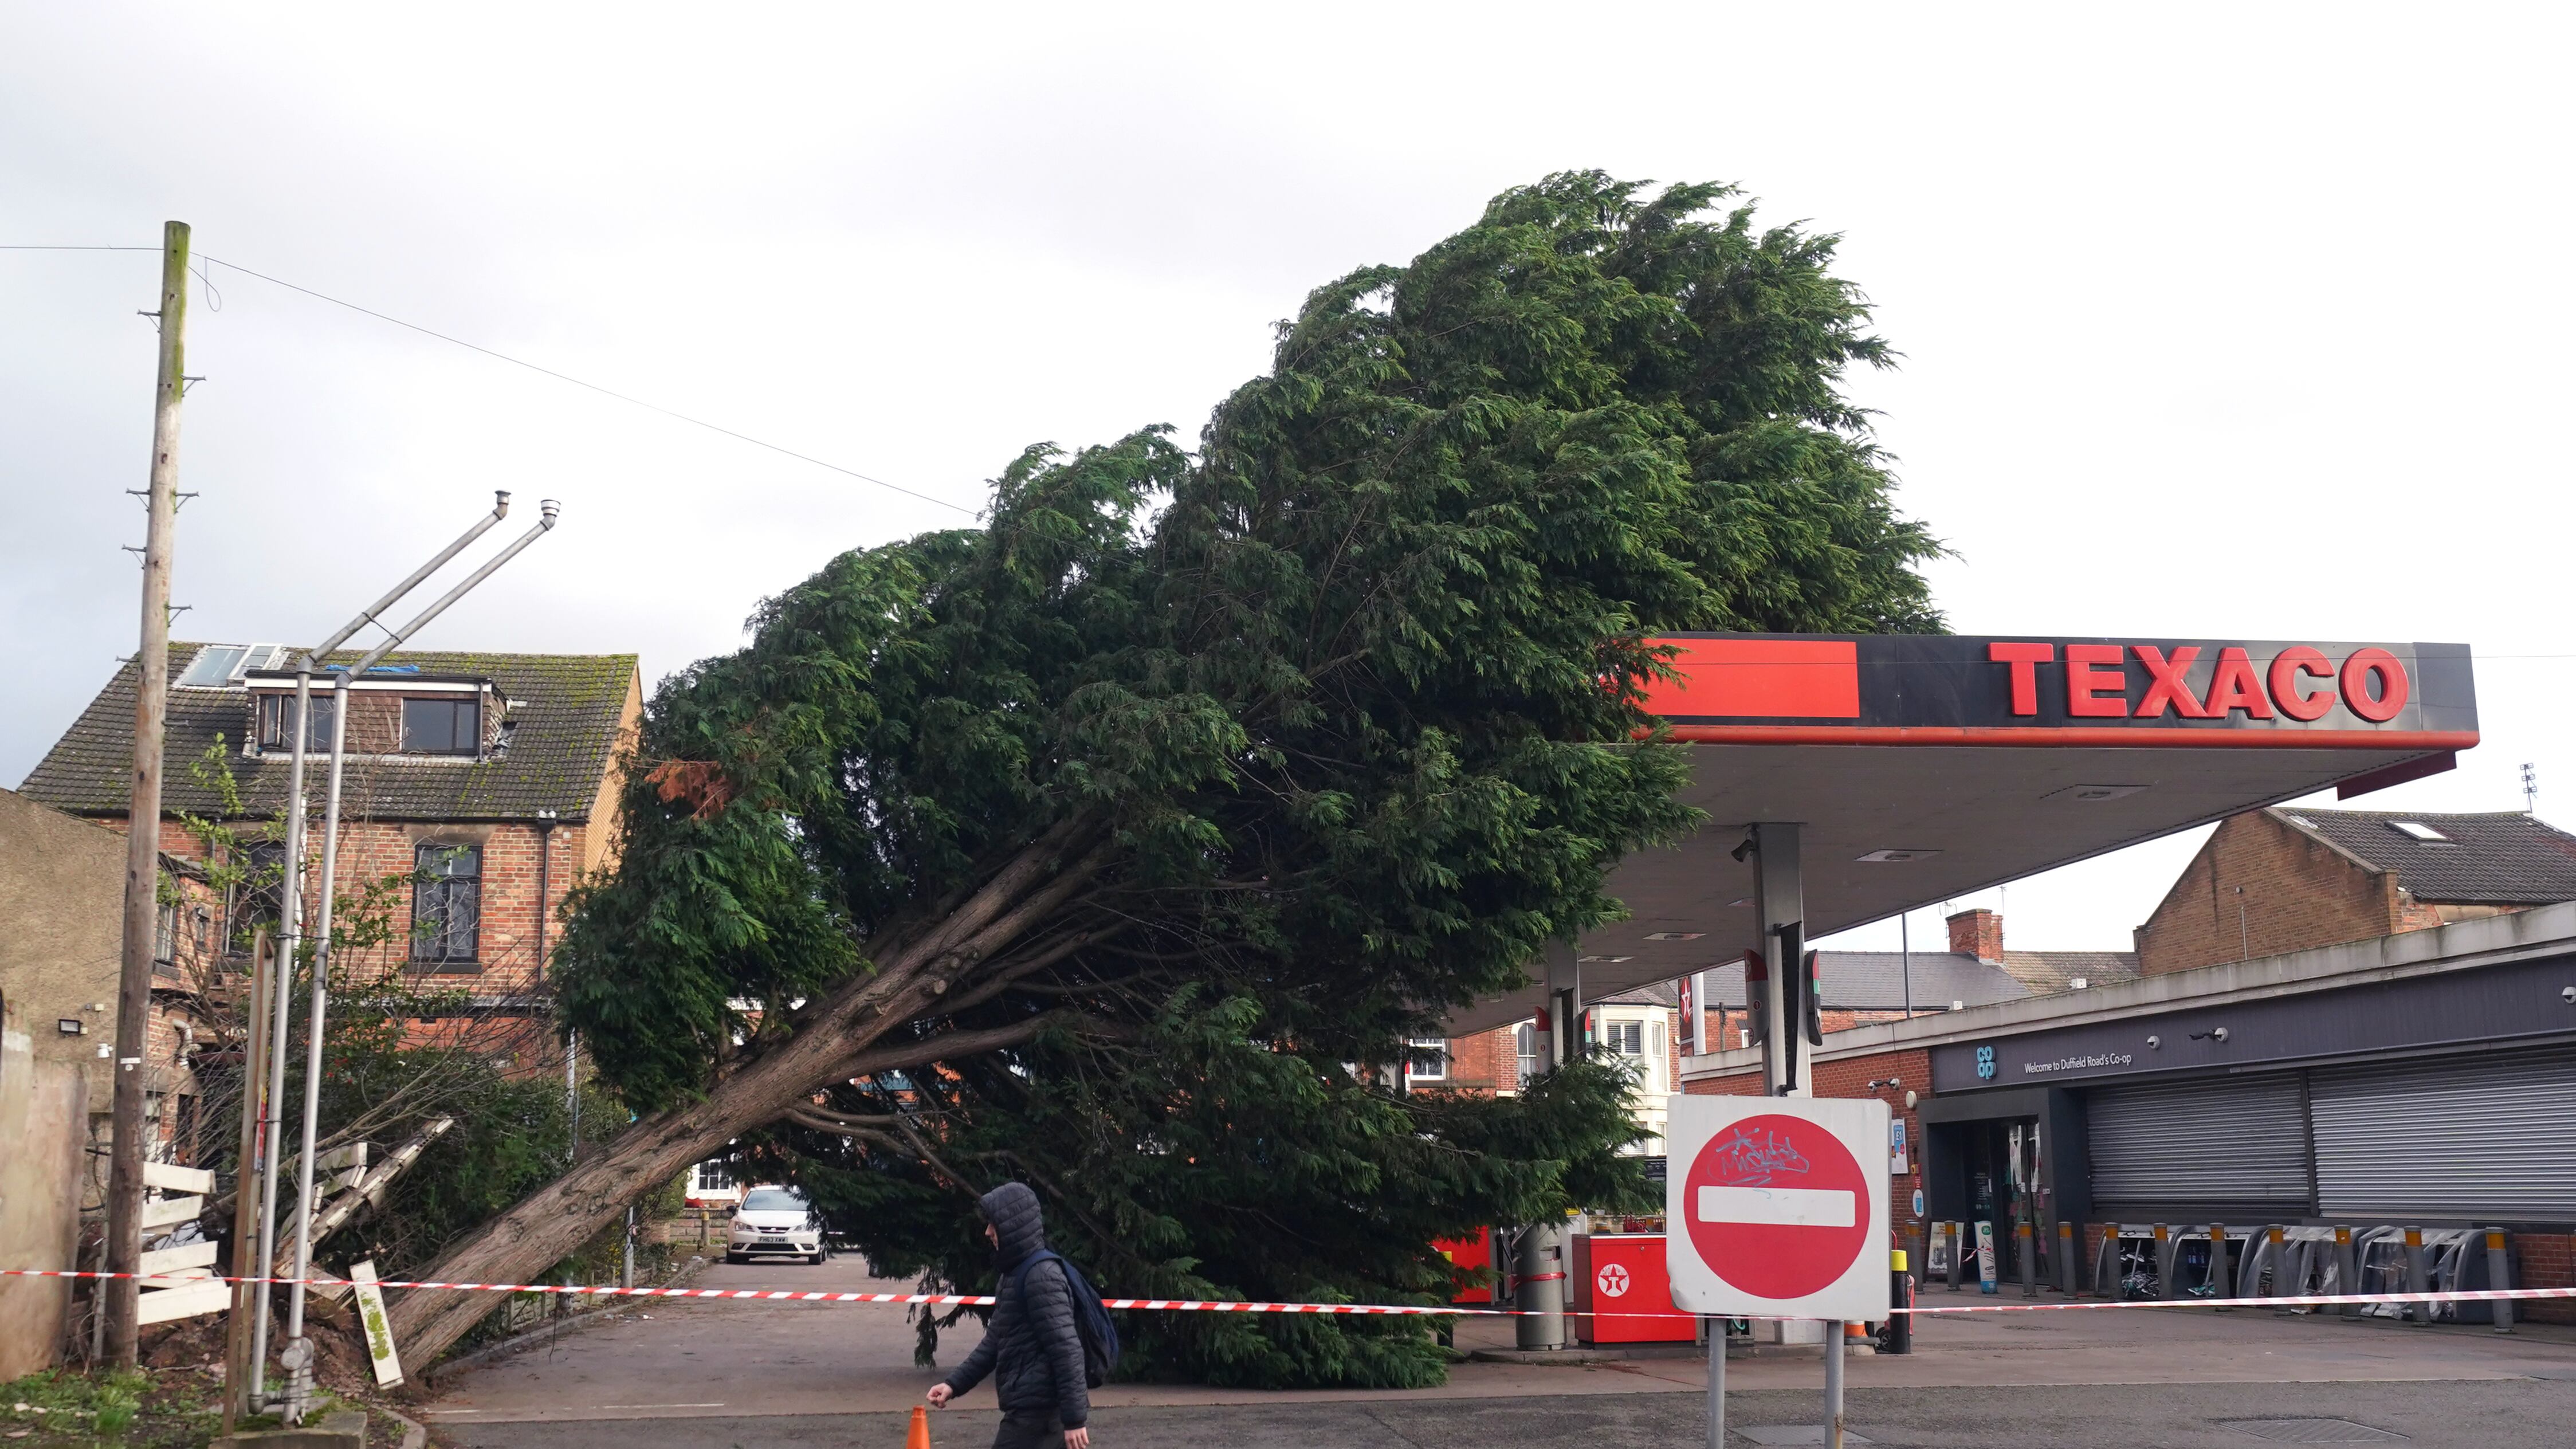 A tree fallen onto the roof of a Texaco petrol station in Derby